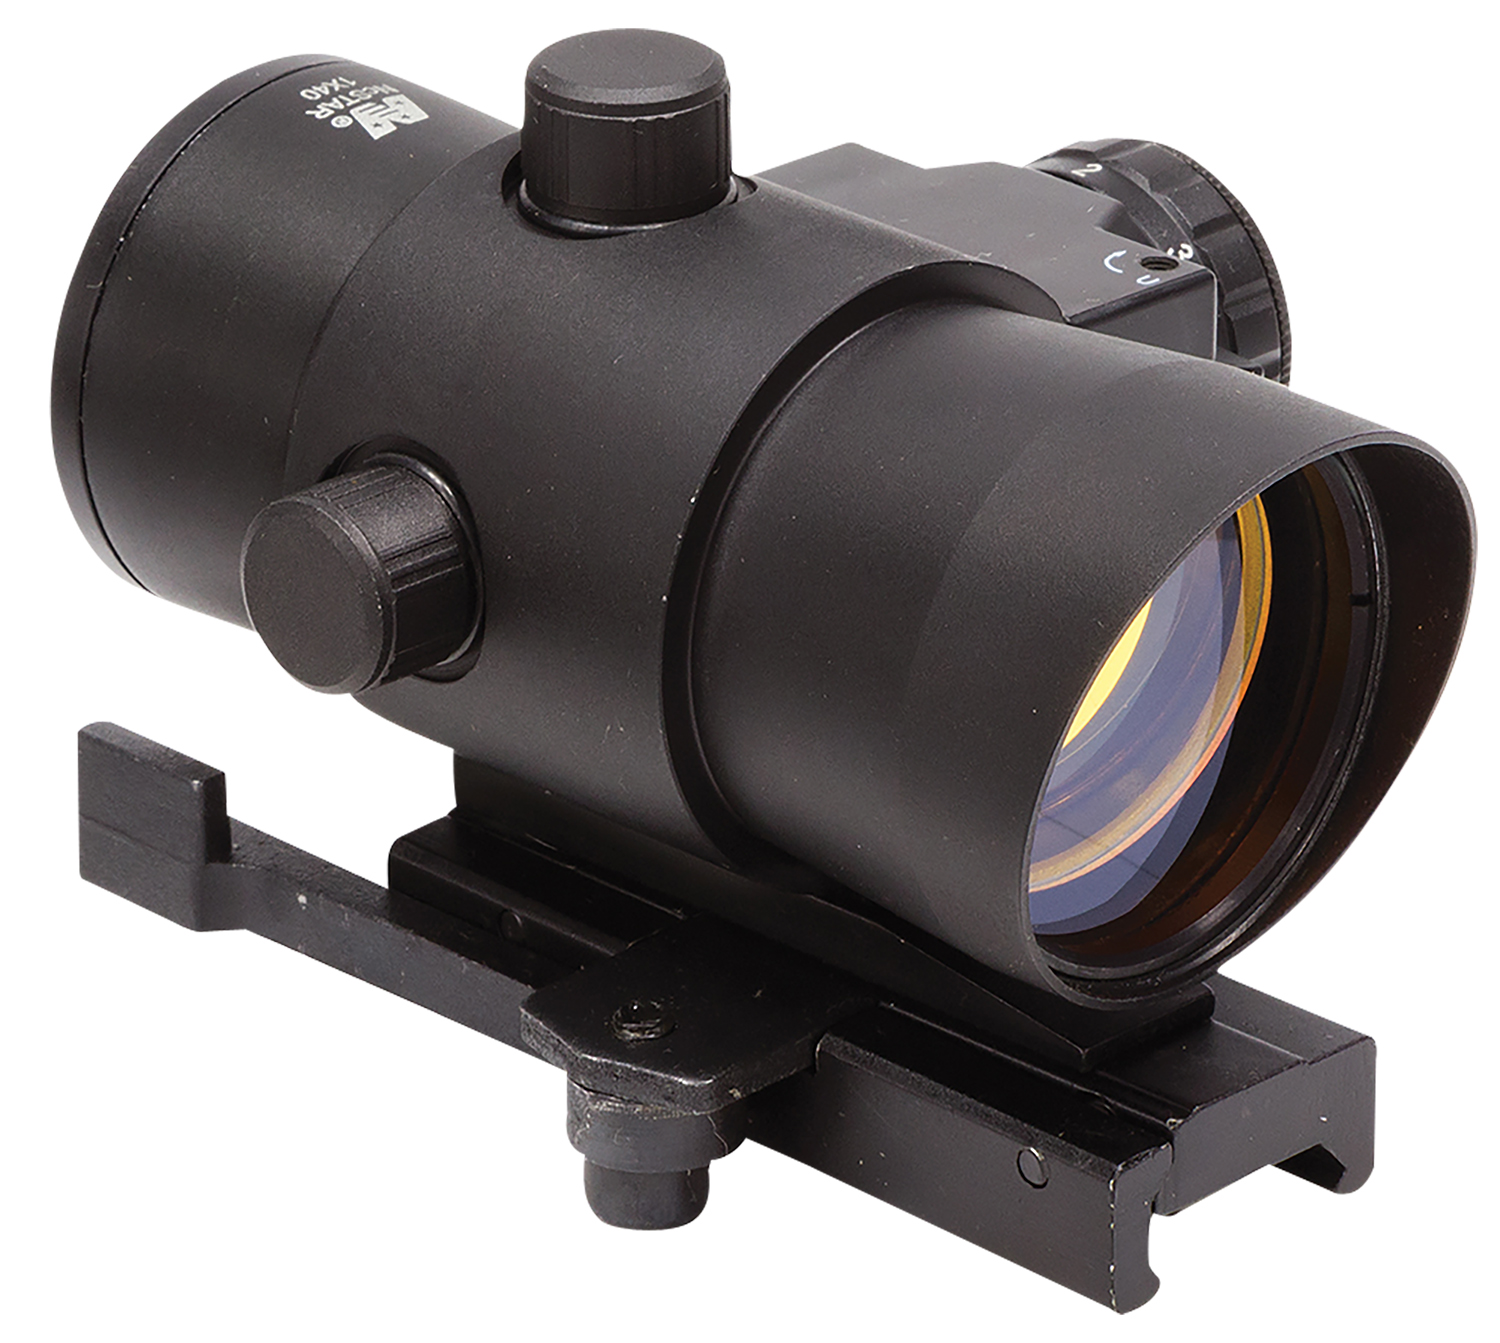 NcStar DLB140R Red Dot w/Laser & QR Mount Black Anodized 1x40mm 3 MOA Illuminated Red Dot Reticle/Red Laser